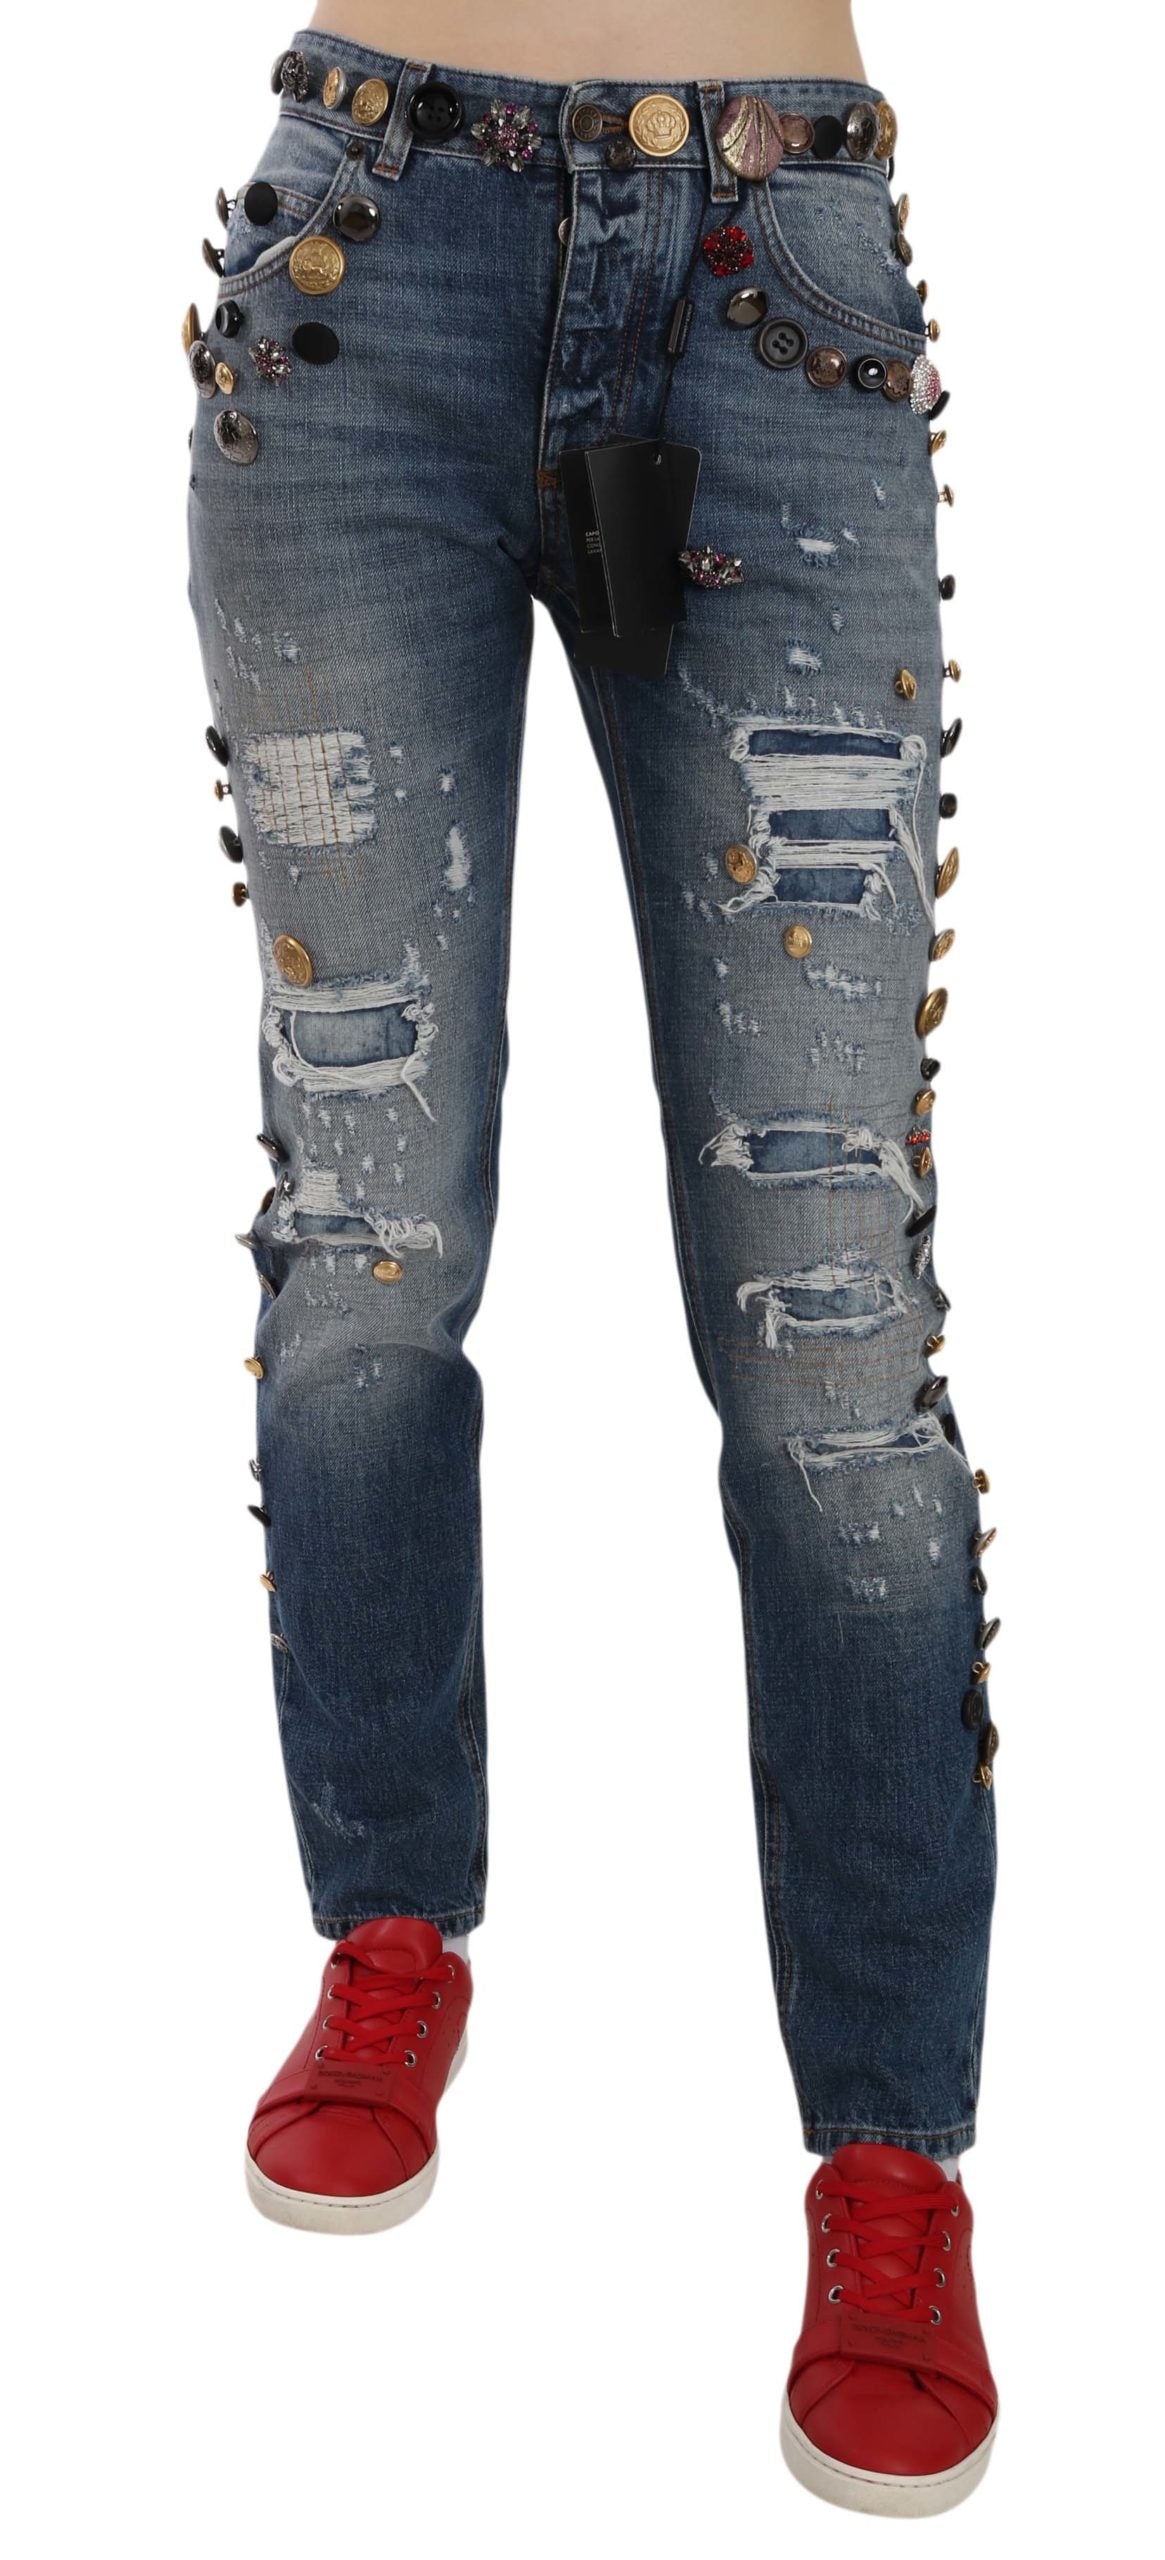 Distressed Embellished Buttons Denim Pants Jeans - Designed by Dolce & Gabbana Available to Buy at a Discounted Price on Moon Behind The Hill Online Designer Discount Store